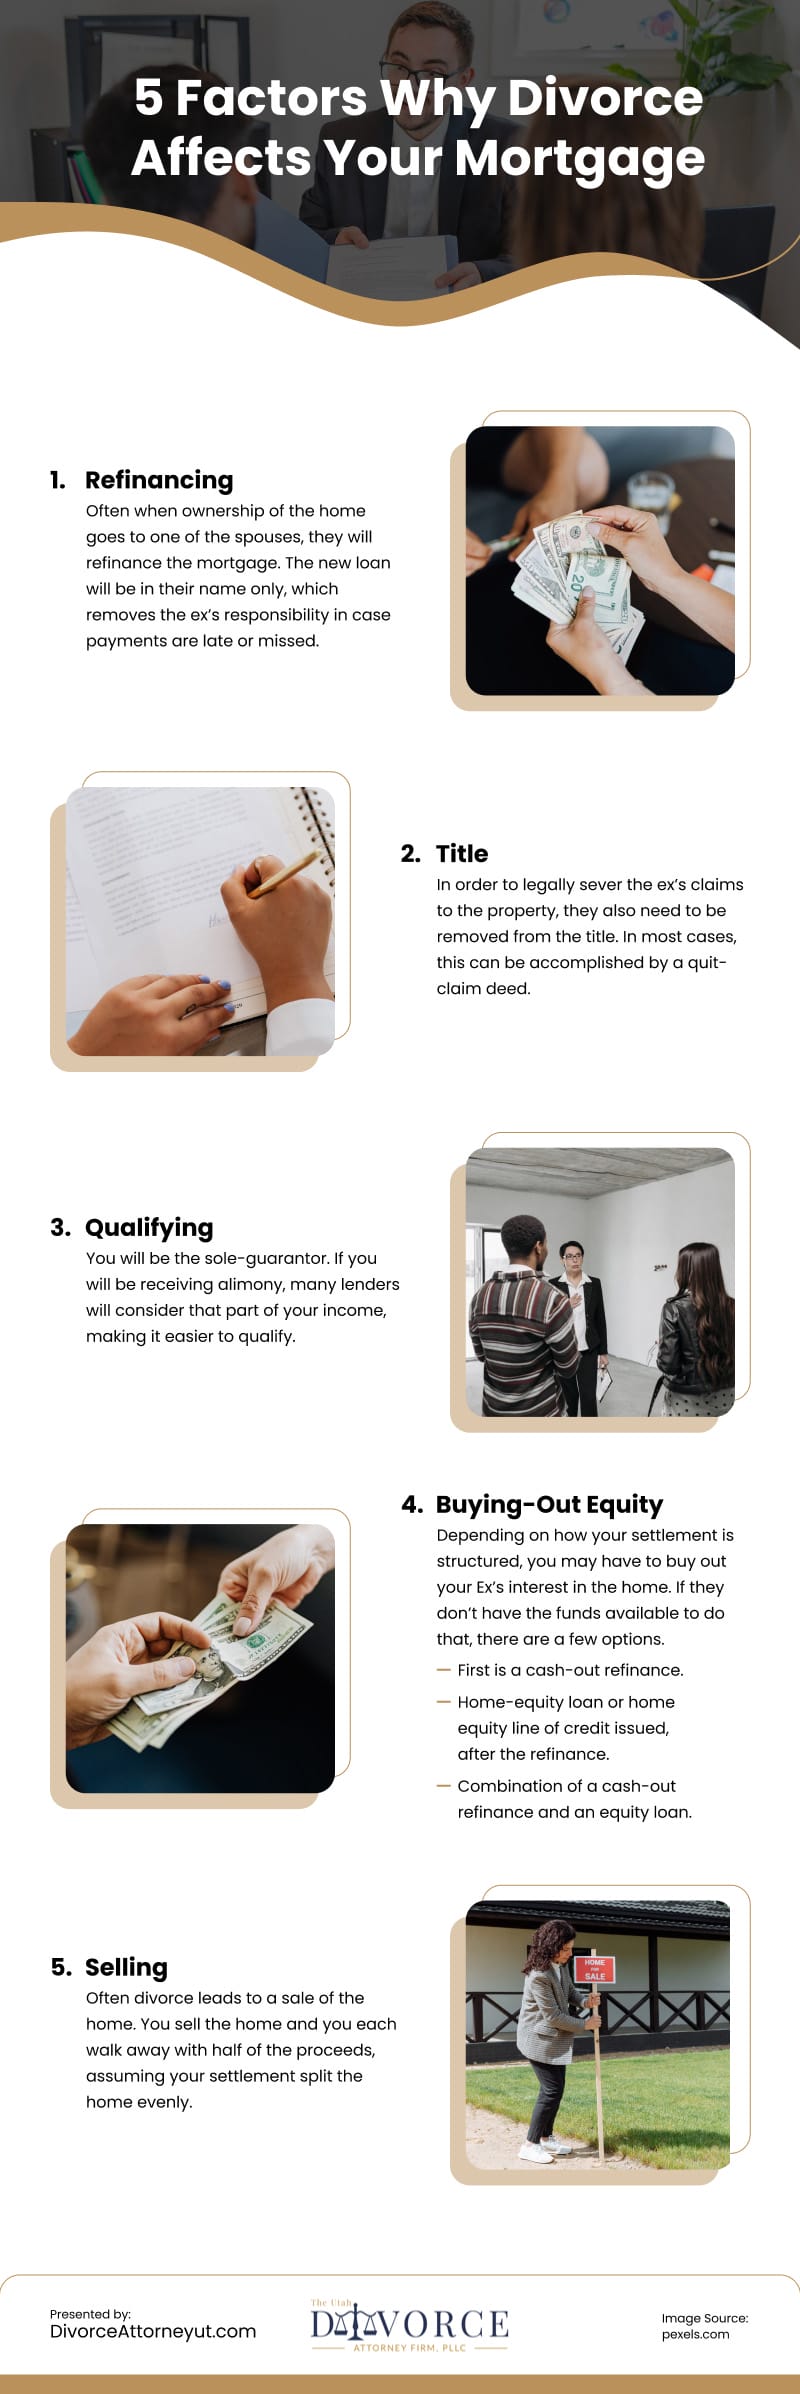 5 Factors Why Divorce Affects Your Mortgage Infographic